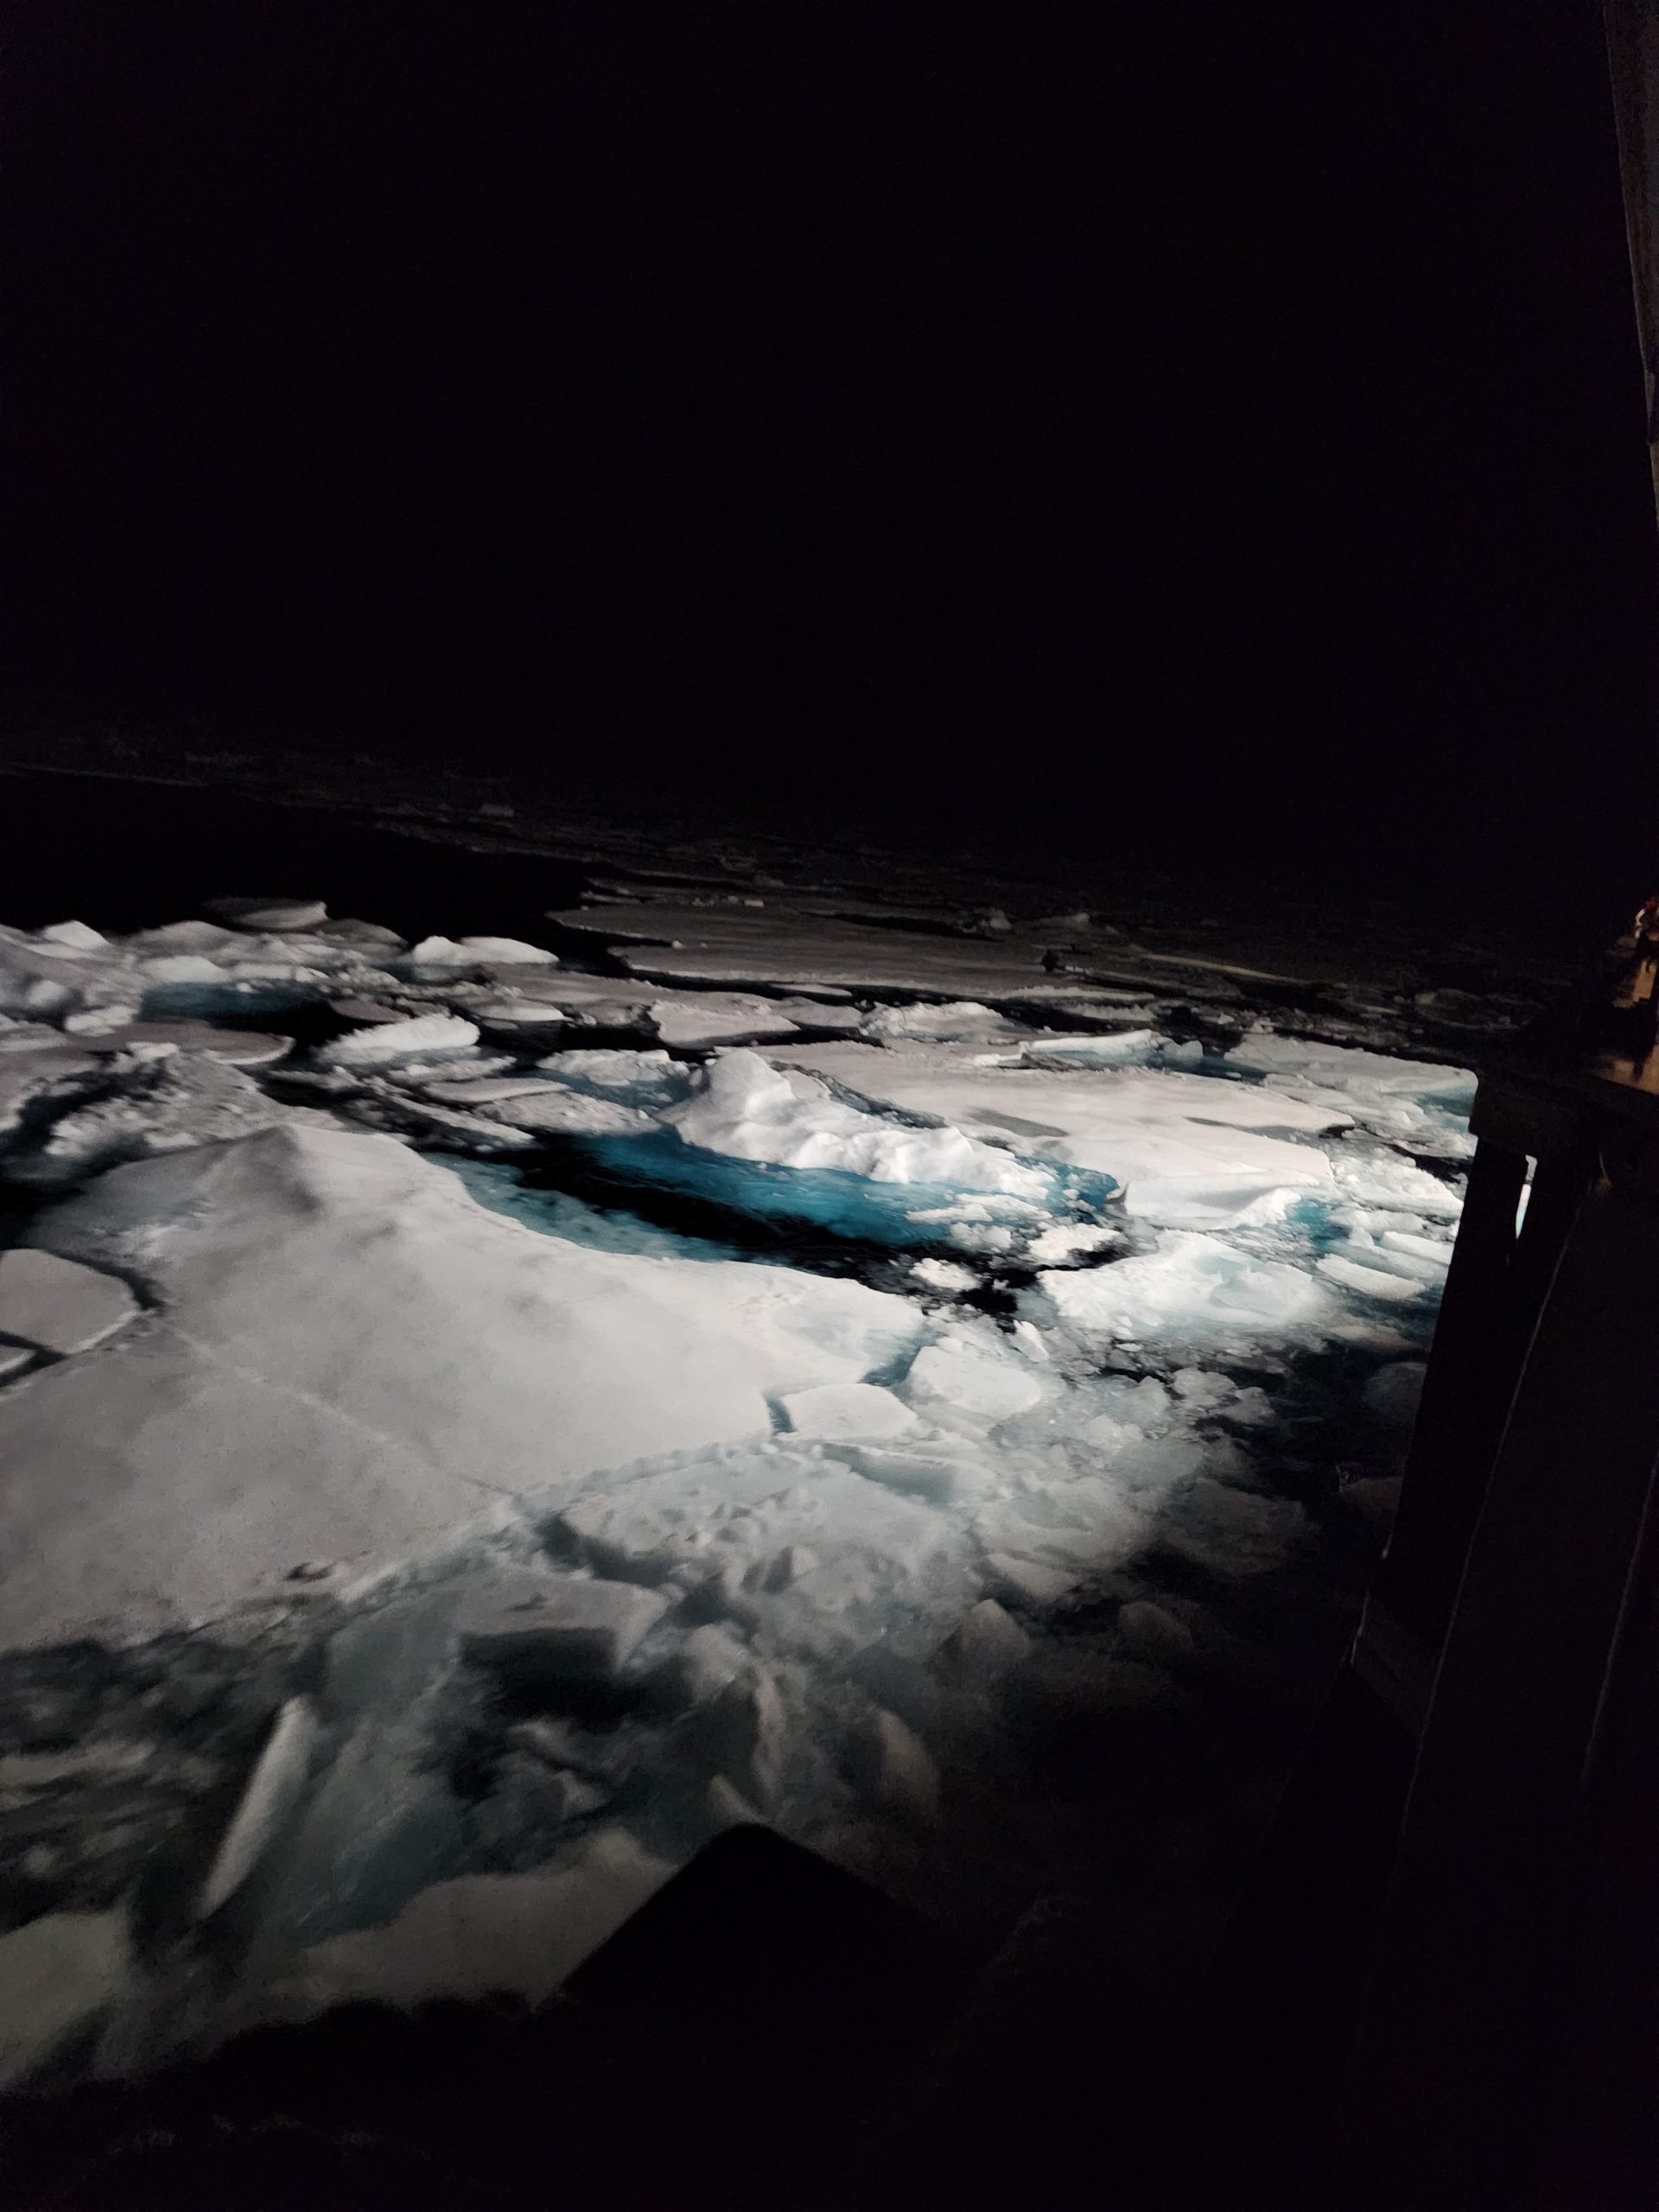 The first batches of sea ice spotted by the night shift.